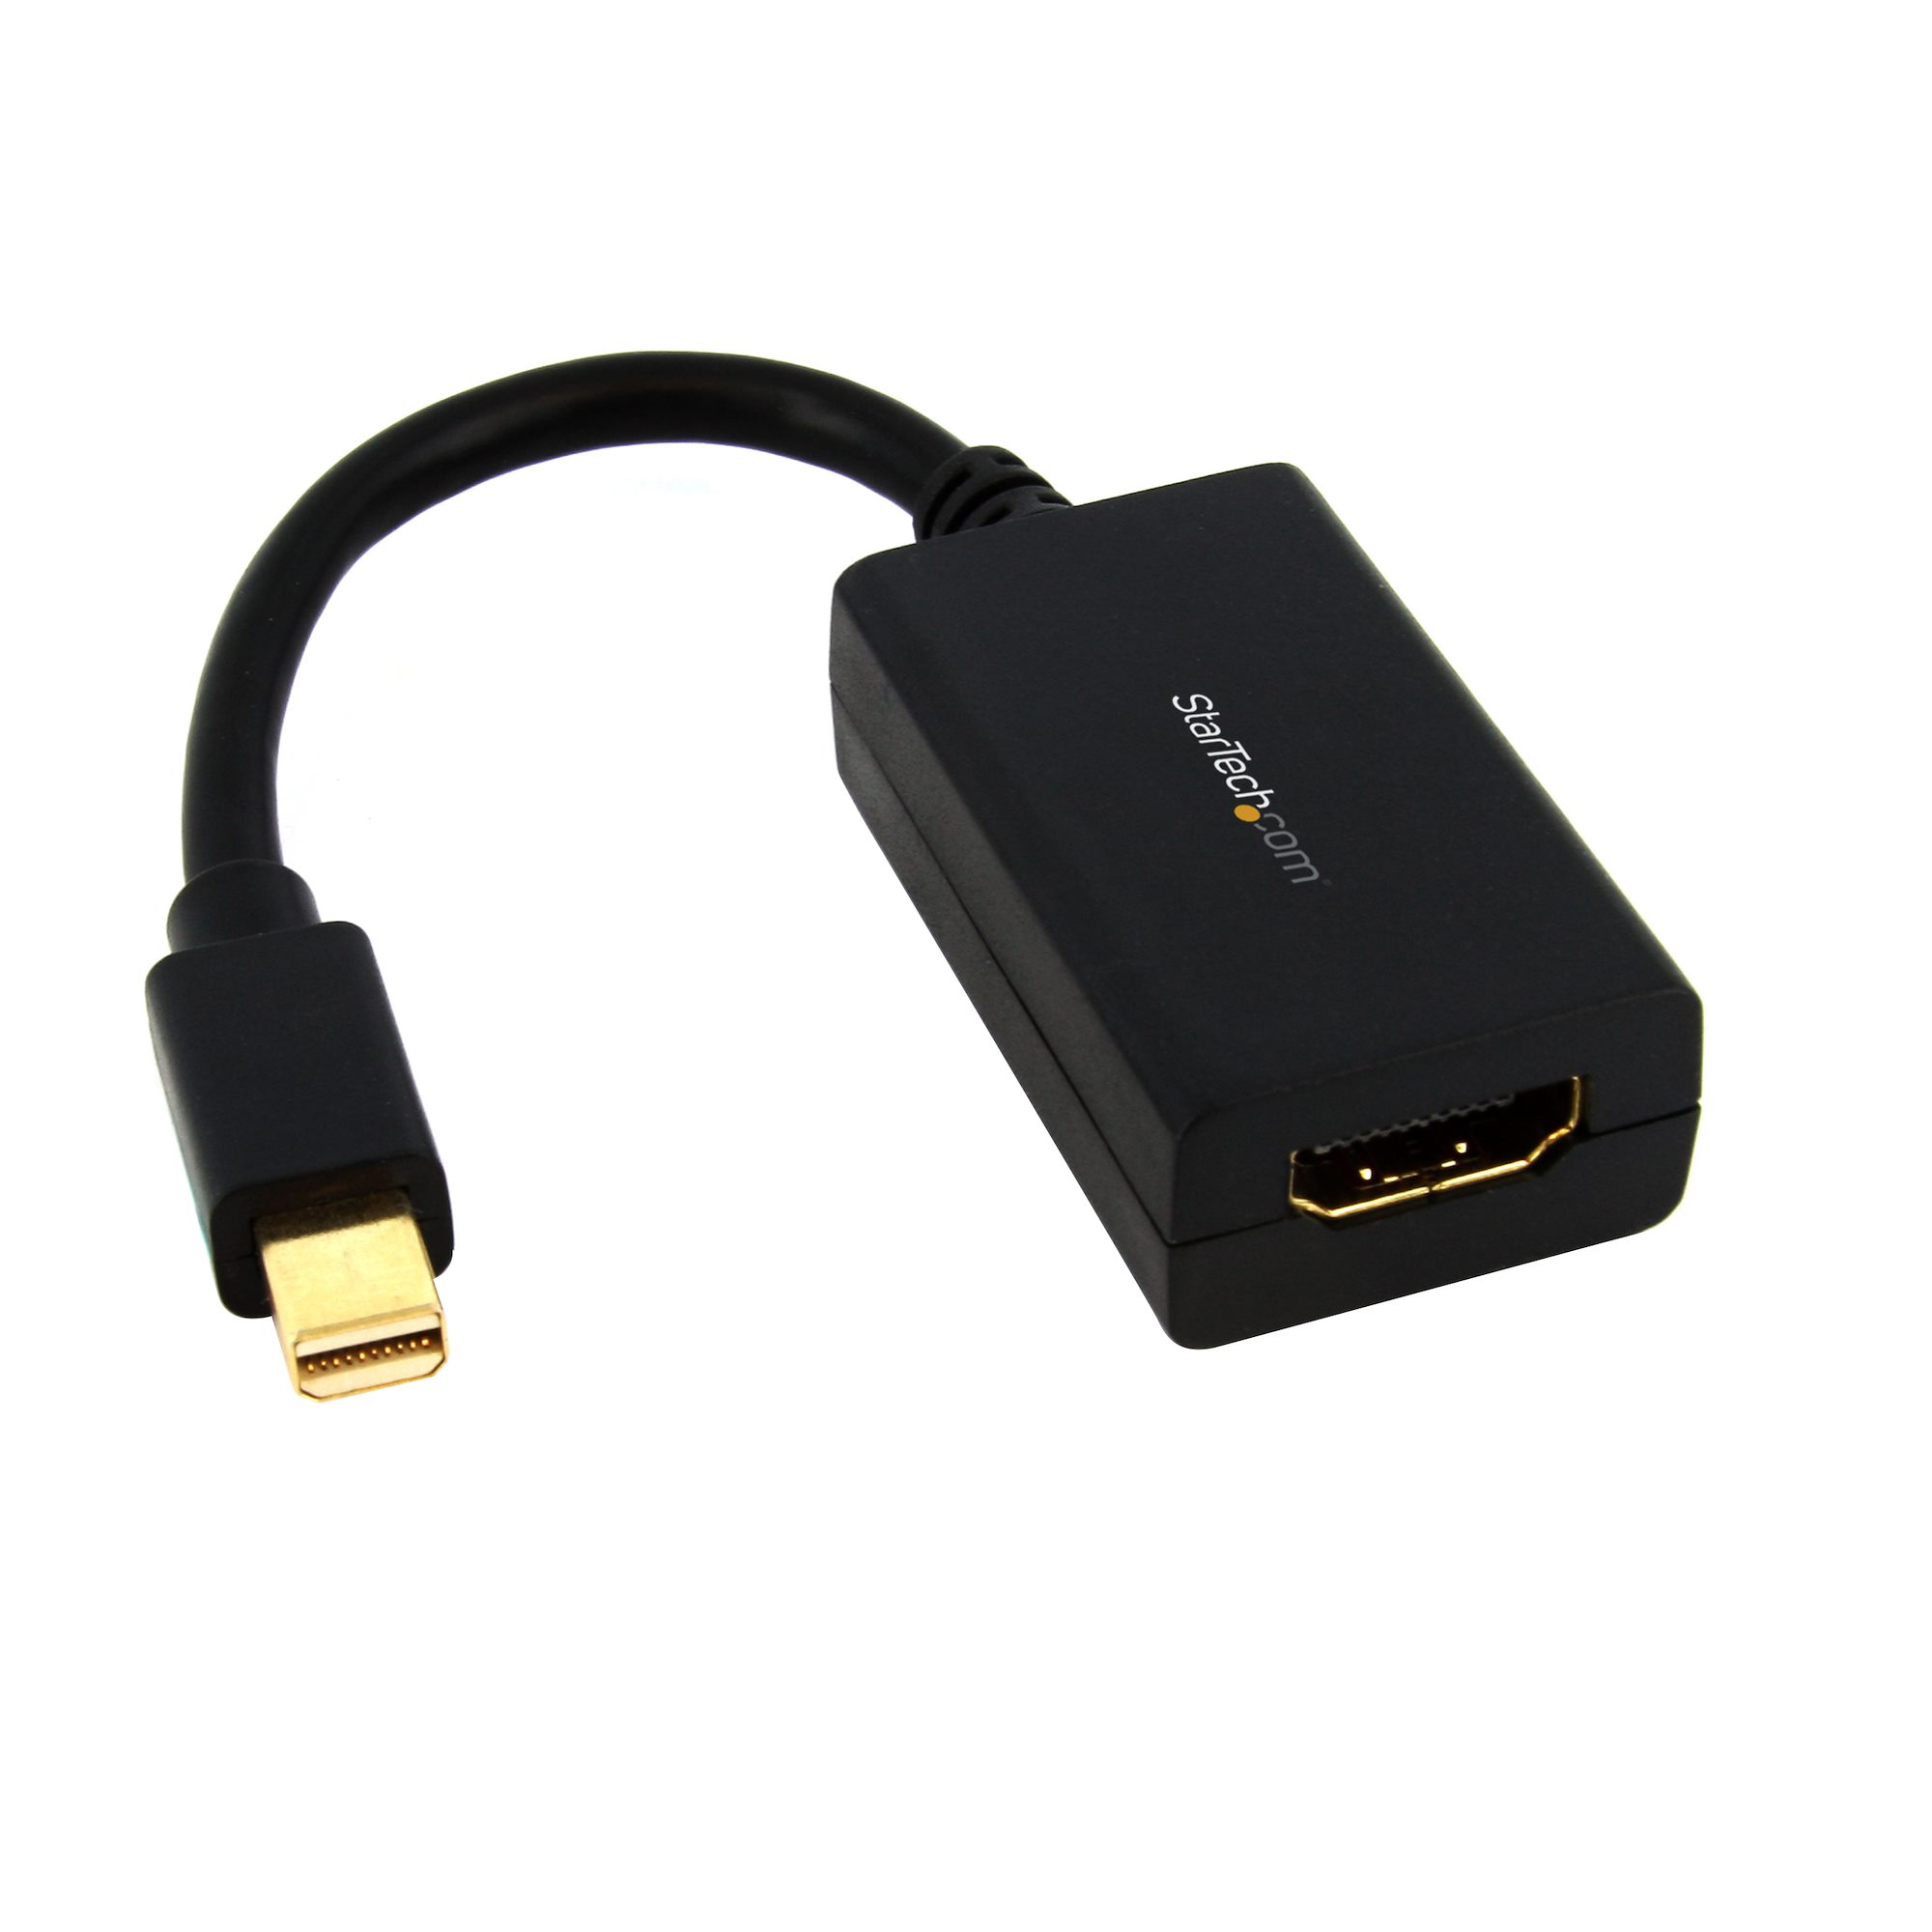 Mini DisplayPort to HDMI Adapter - mDP to HDMI Video Converter - 1080p -  mDP or TB 1/2 to HDMI Monitor/Display - Passive mDP 1.2 to HDMI Dongle - 